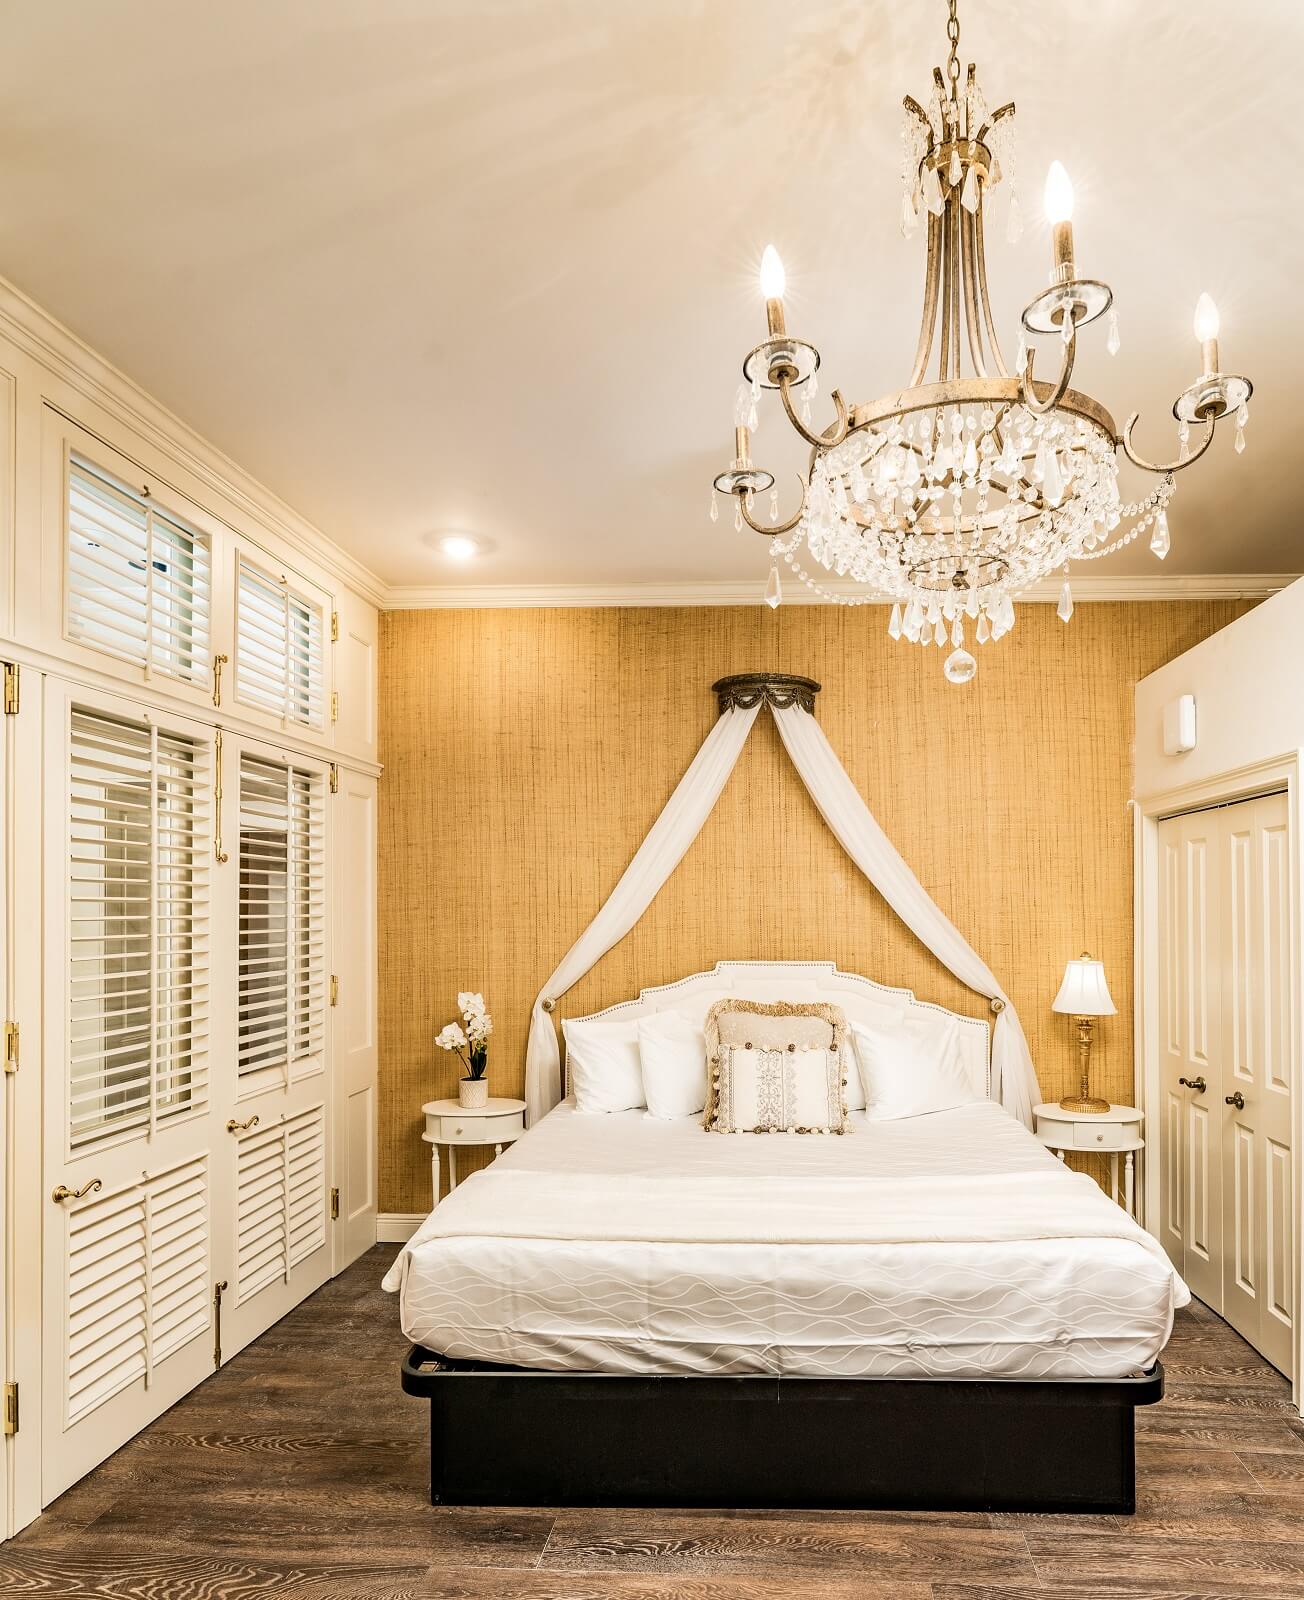 The Alexandre Unit 404 bedroom, a New Orleans luxury rental.